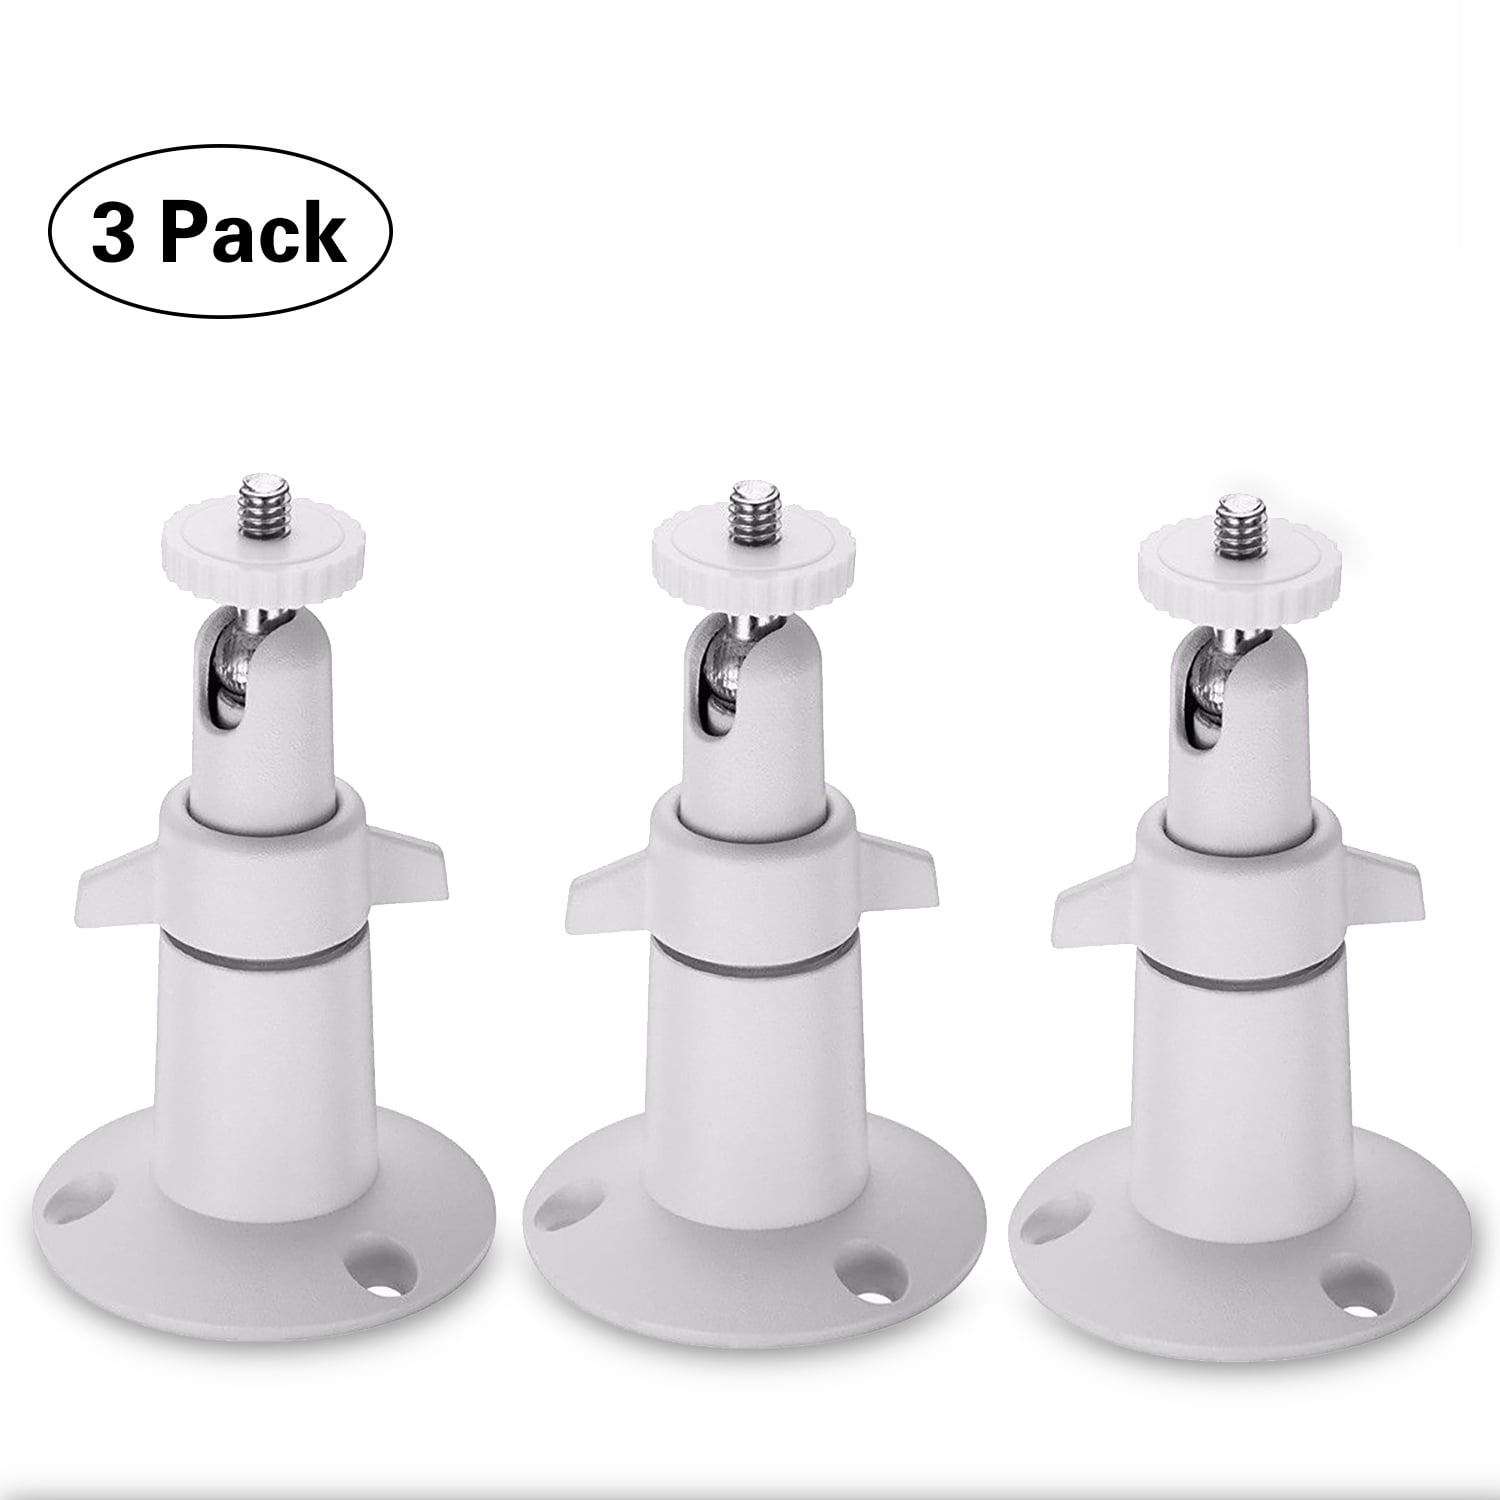 White 4pcs Adjustable Wall Ceiling Mount Stand Holder Bracket for Arlo Pro Security CCTV Camera 